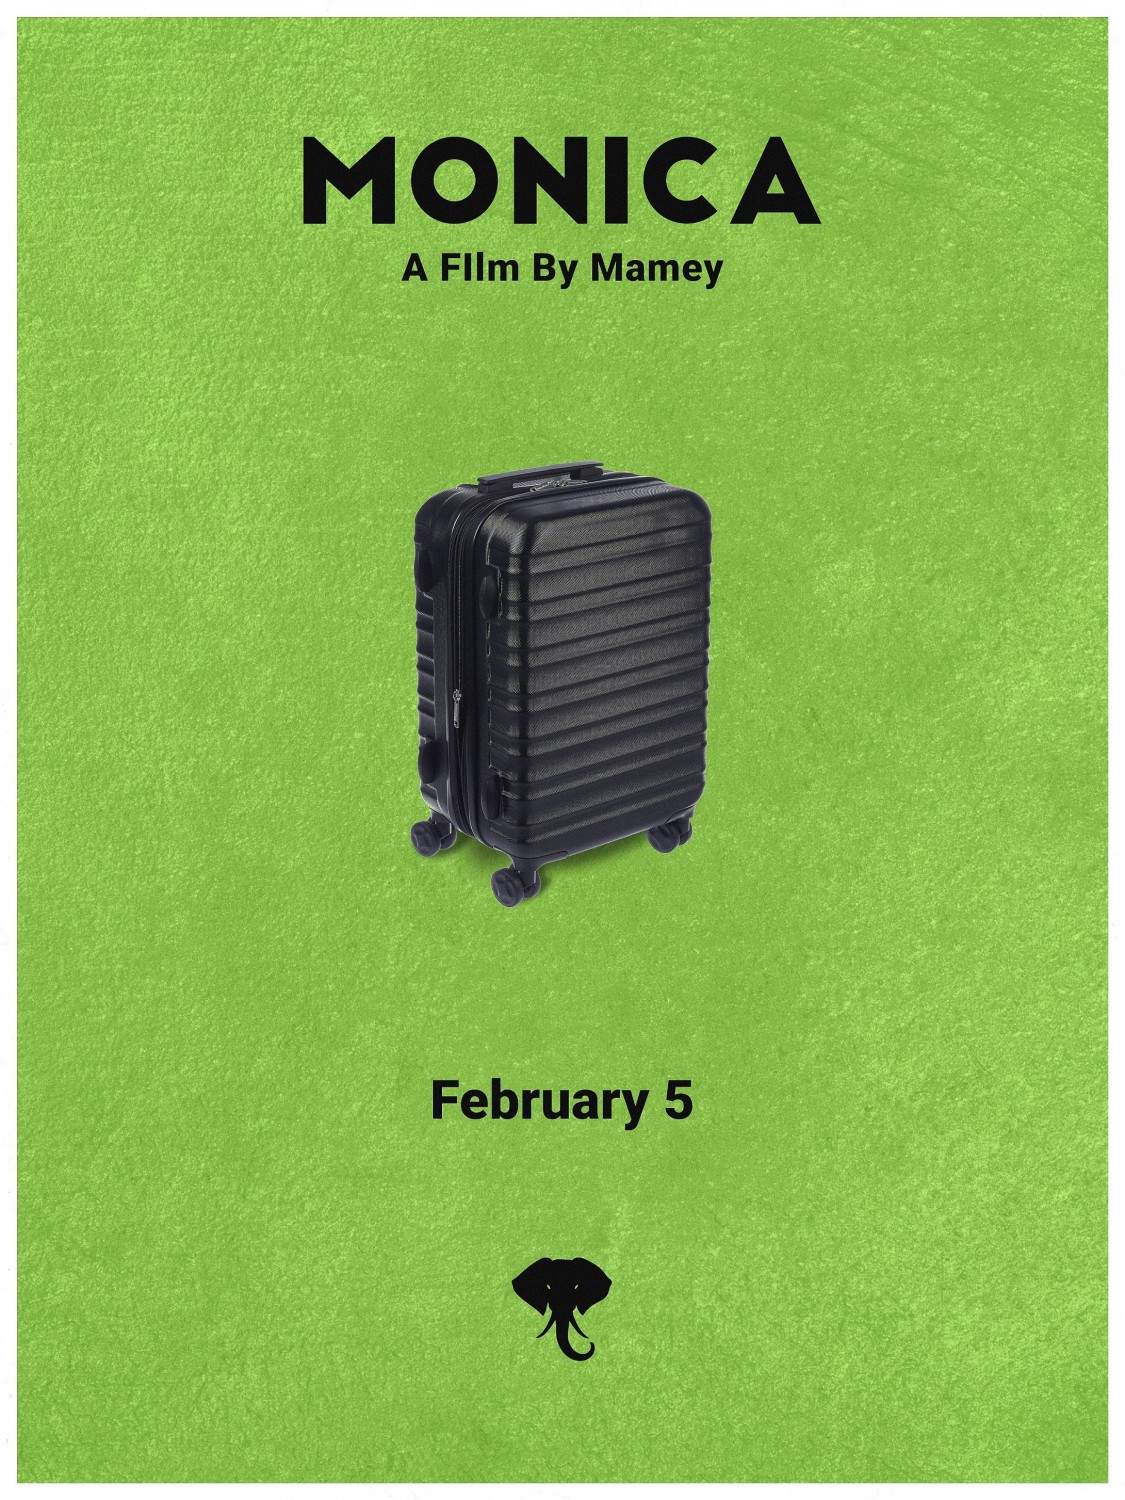 Extra Large Movie Poster Image for Monica